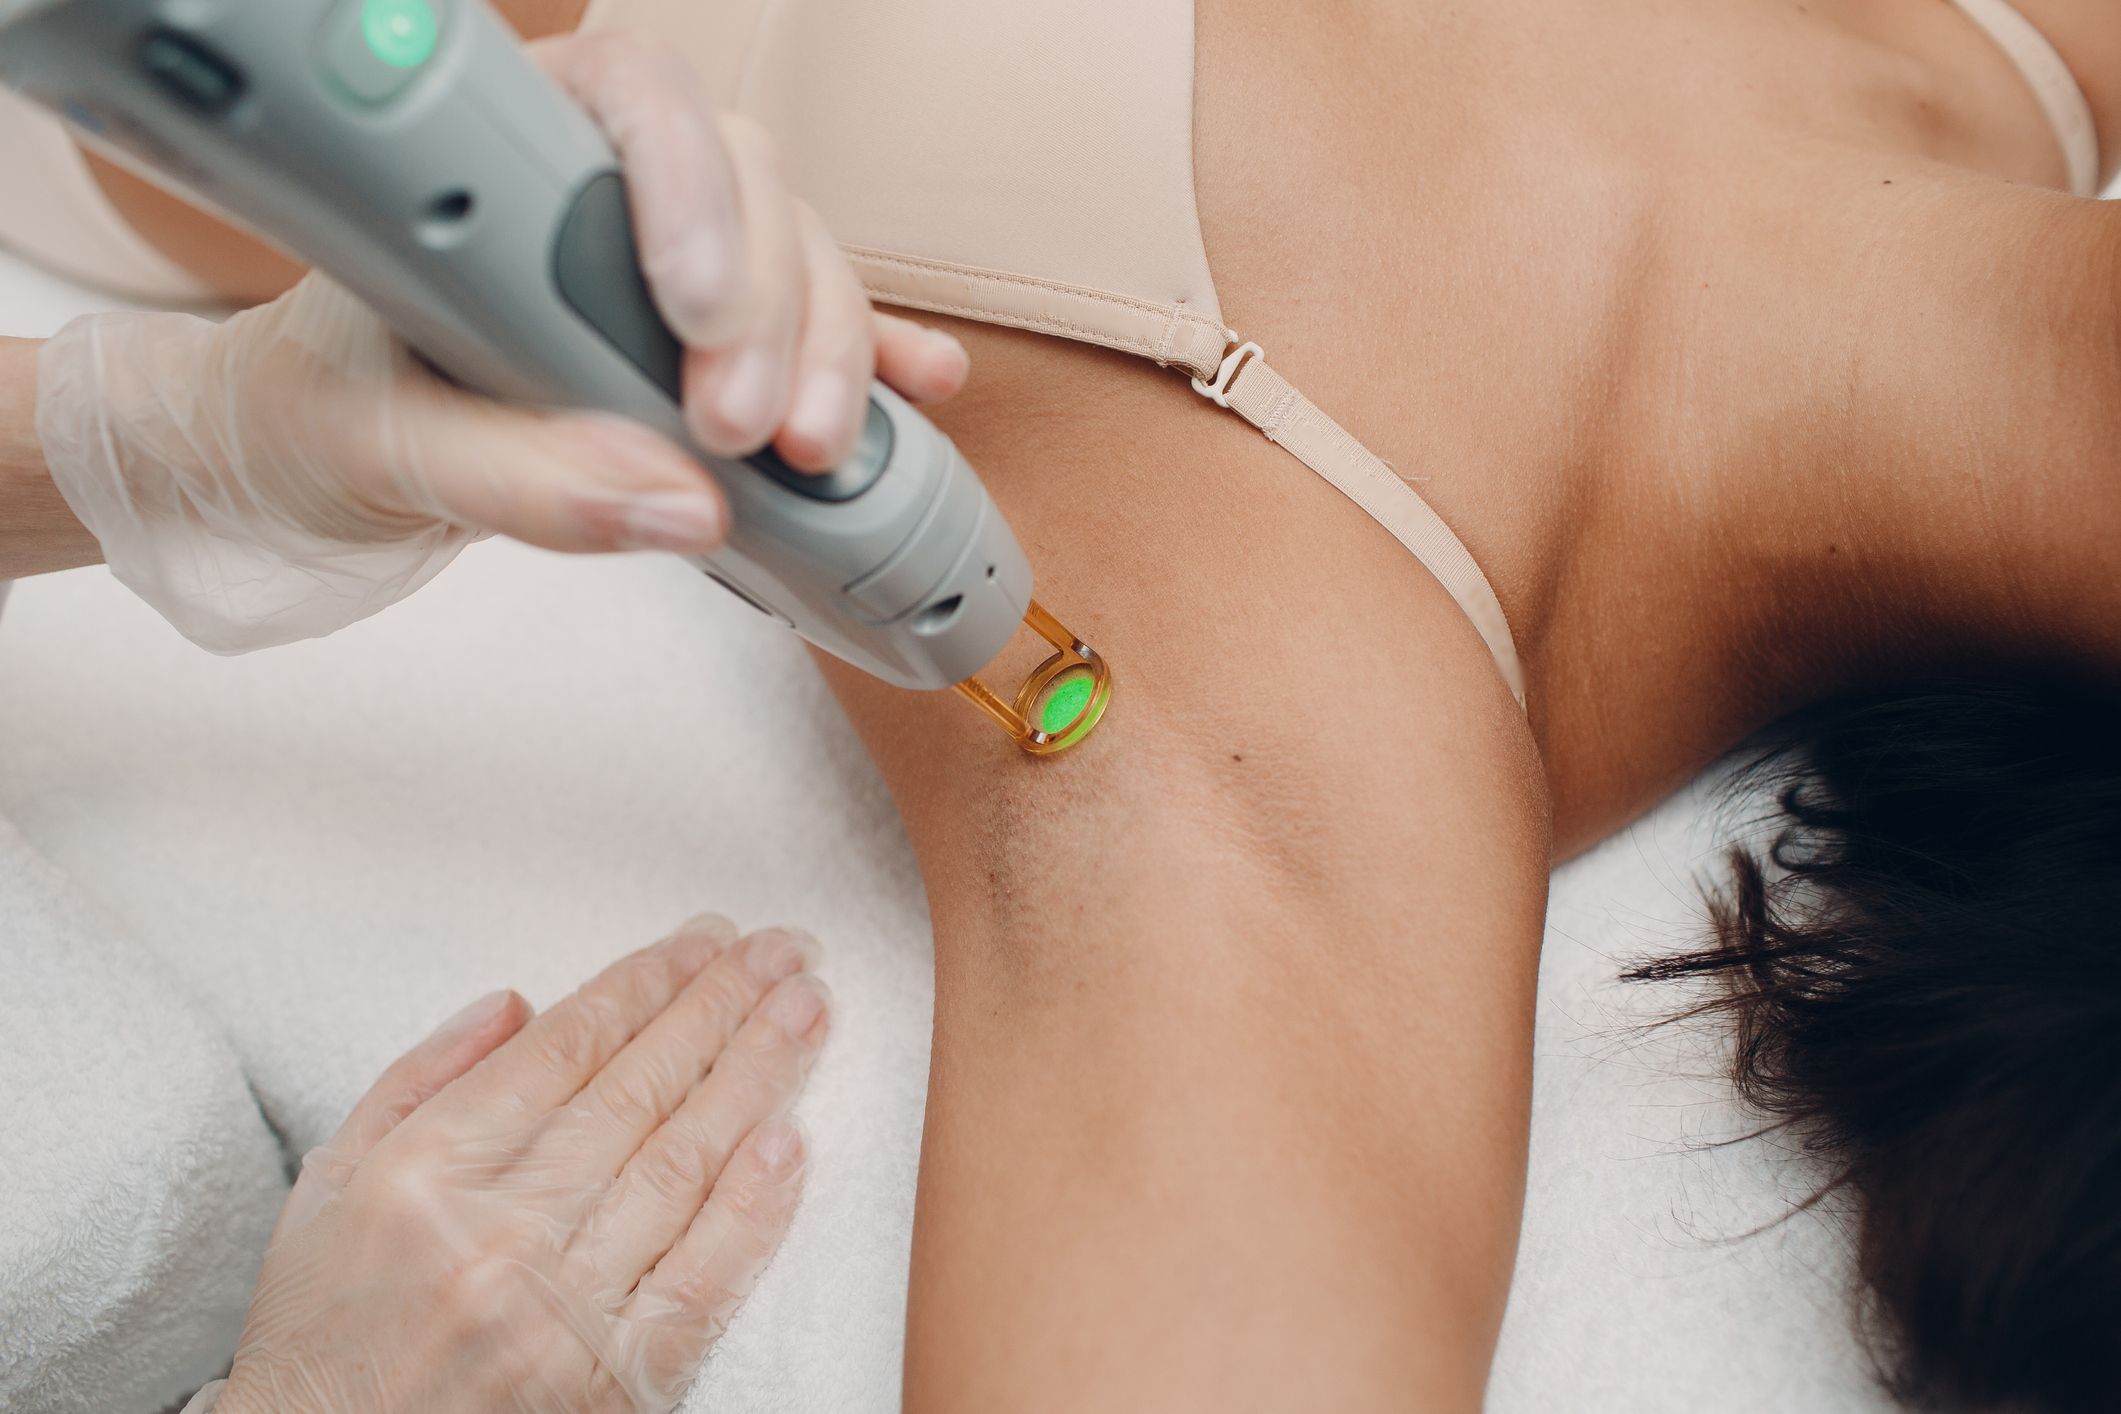 Flawless Skin Awaits: Derby’s Laser Hair Removal Experts